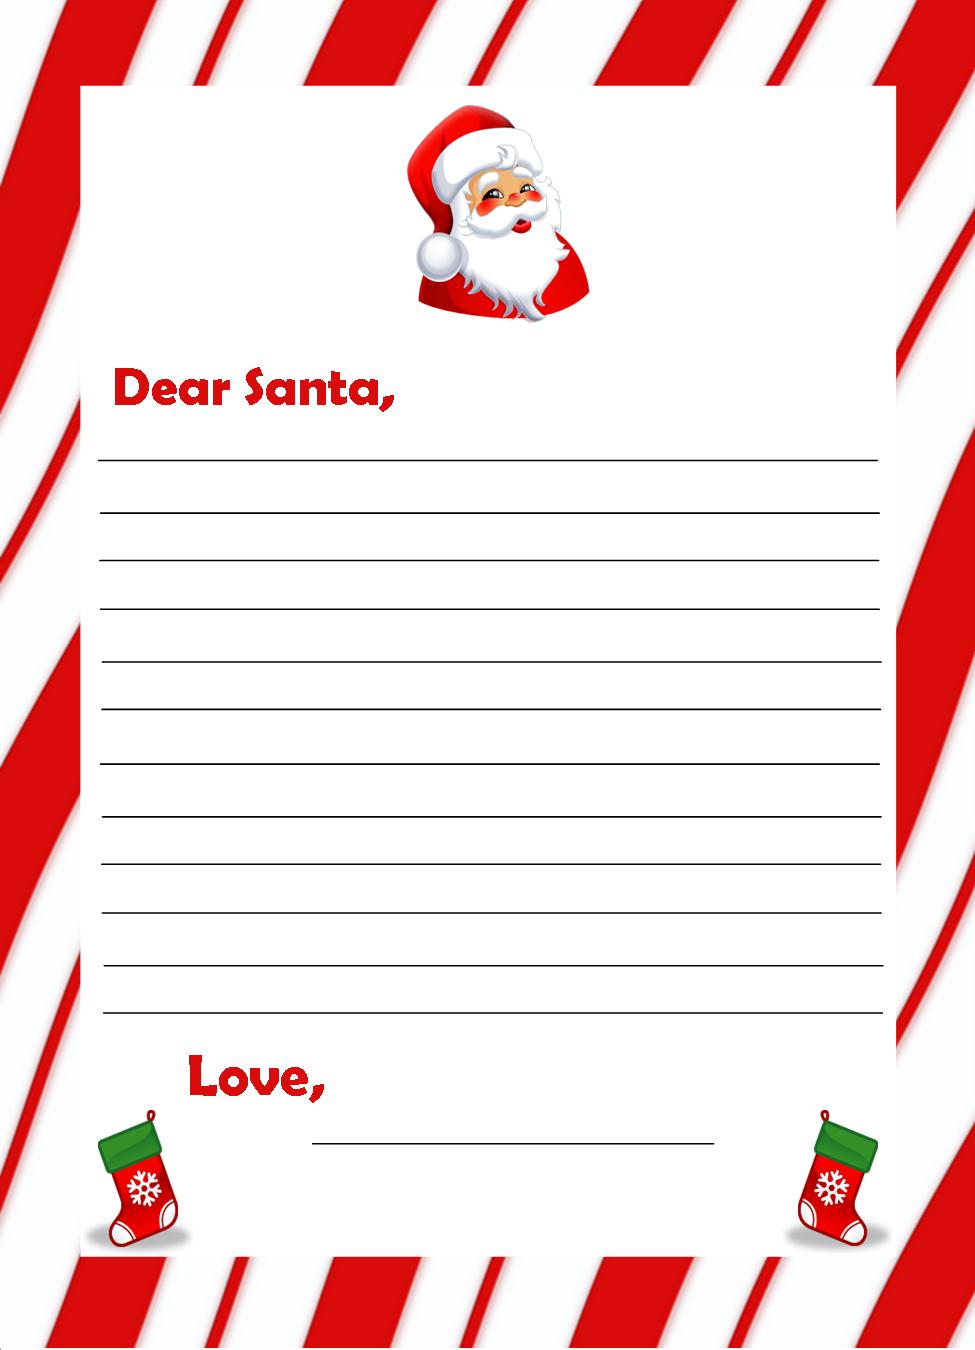 Free Printable Letter To Santa Claus Template For Children